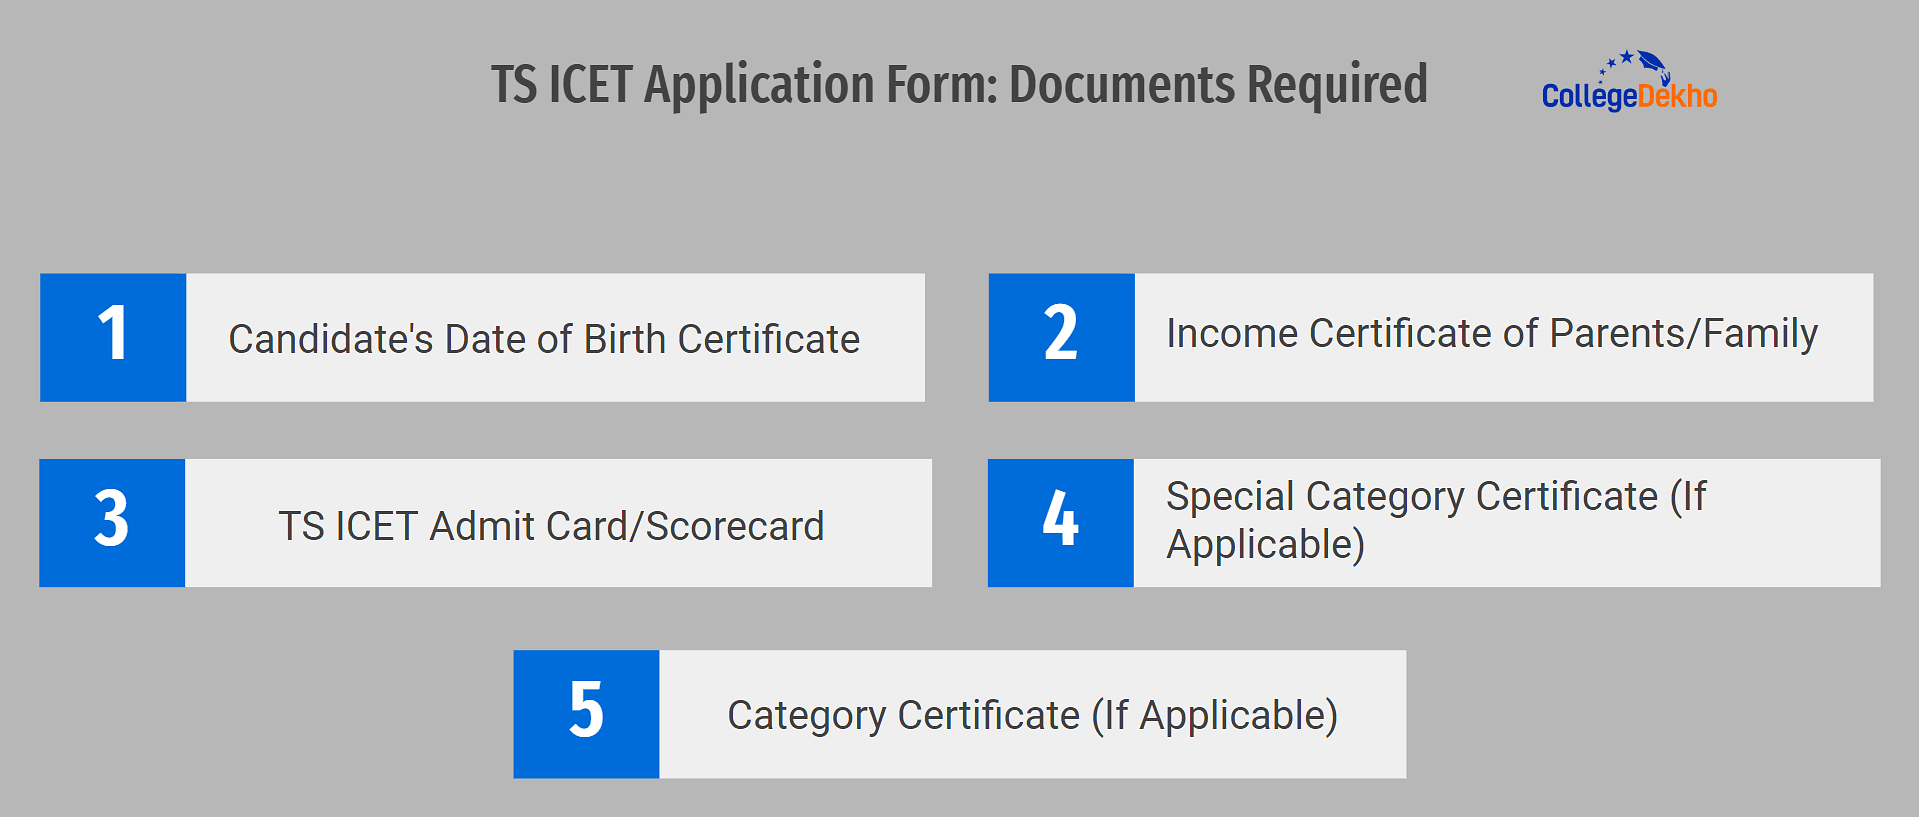 TS ICET Application Form Documents Required